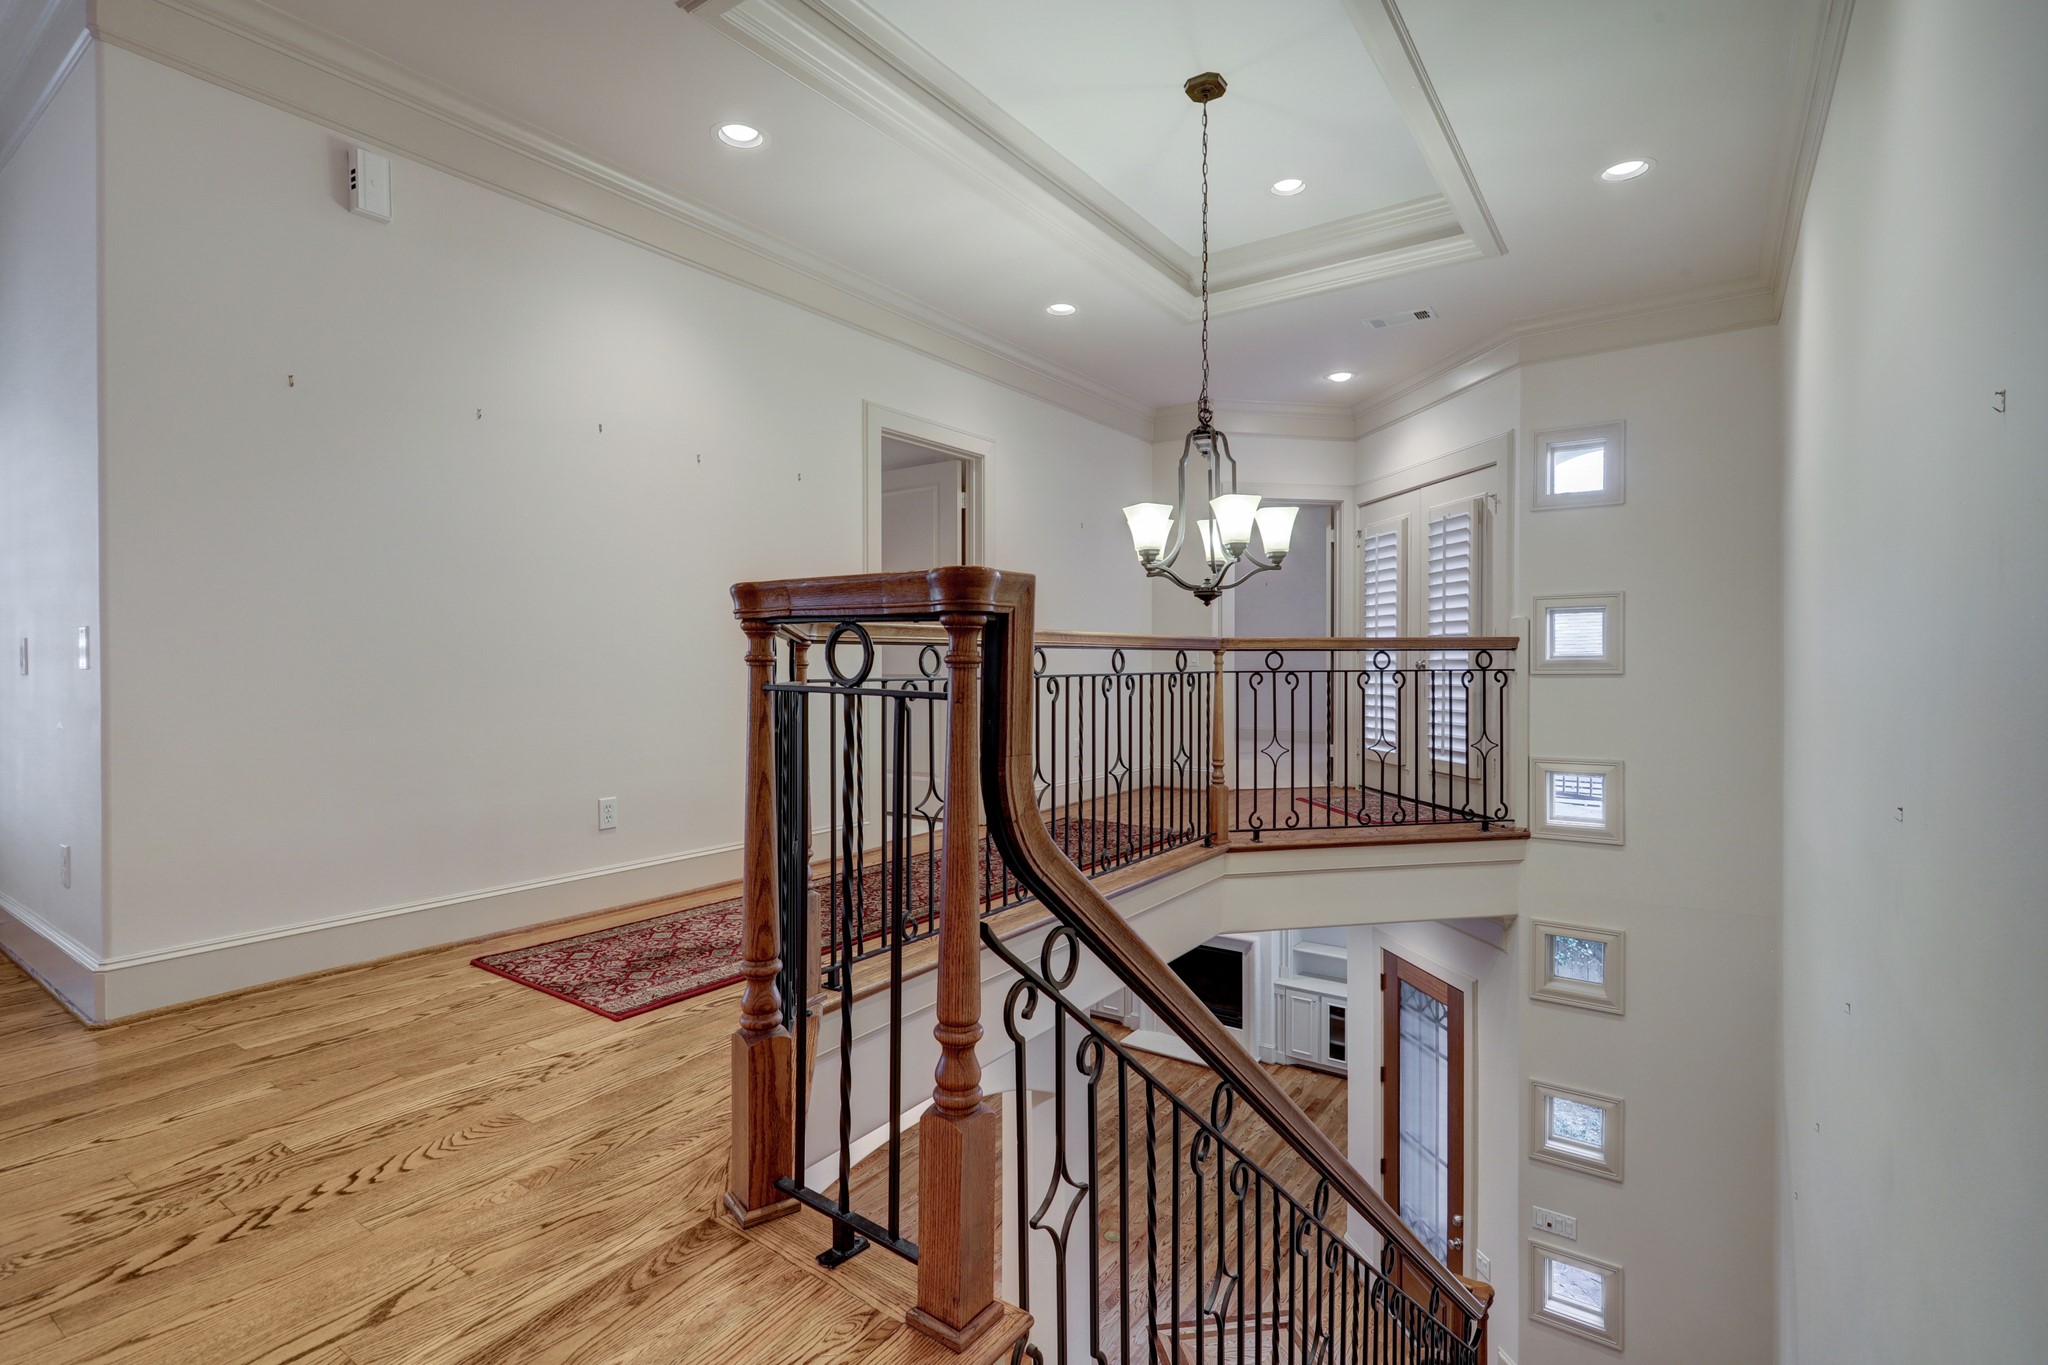 Hall to the 2 secondary bedrooms and their baths. Hardwood floors and beautiful moldings.